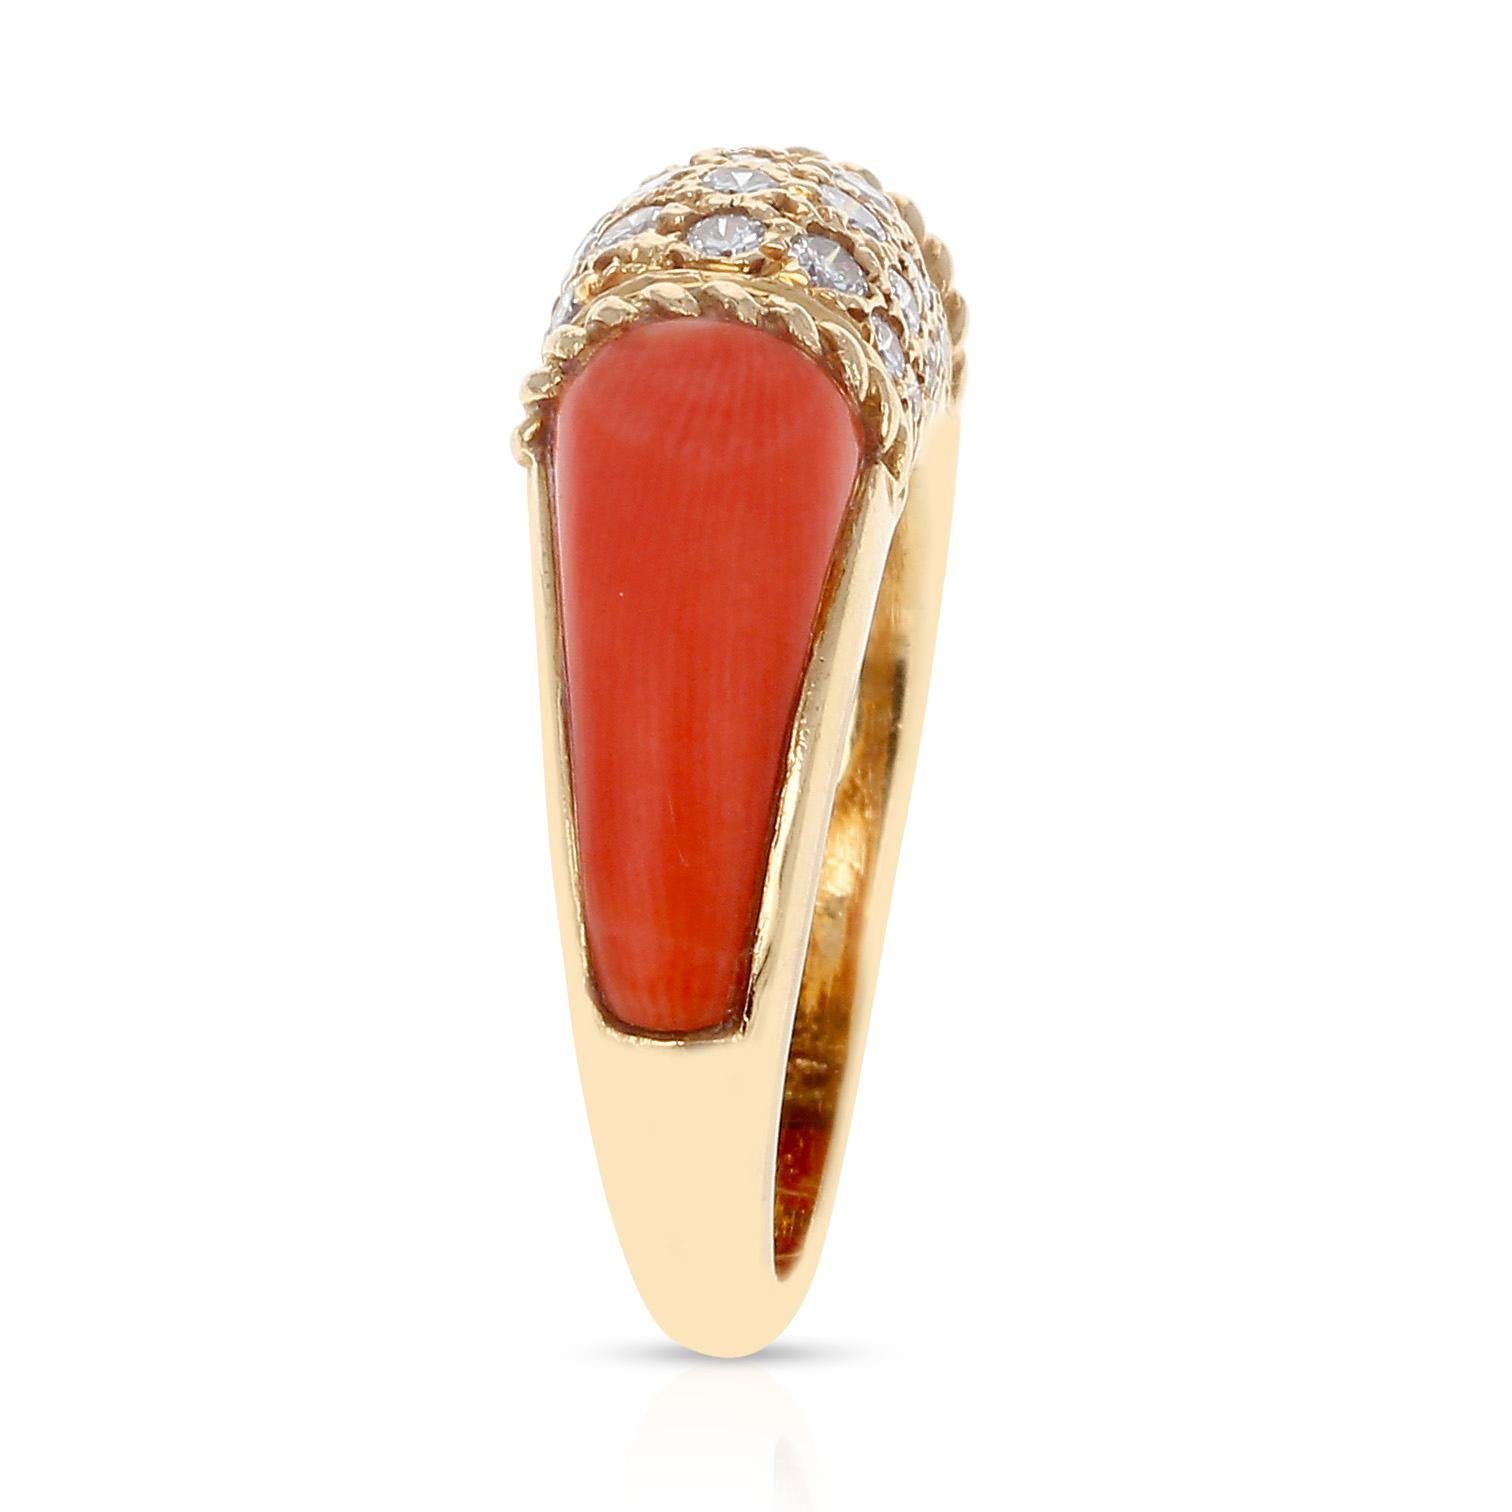 Contemporary Van Cleef & Arpels Coral and 7 Row Diamond Stacking Philippine Ring, 18K Yellow